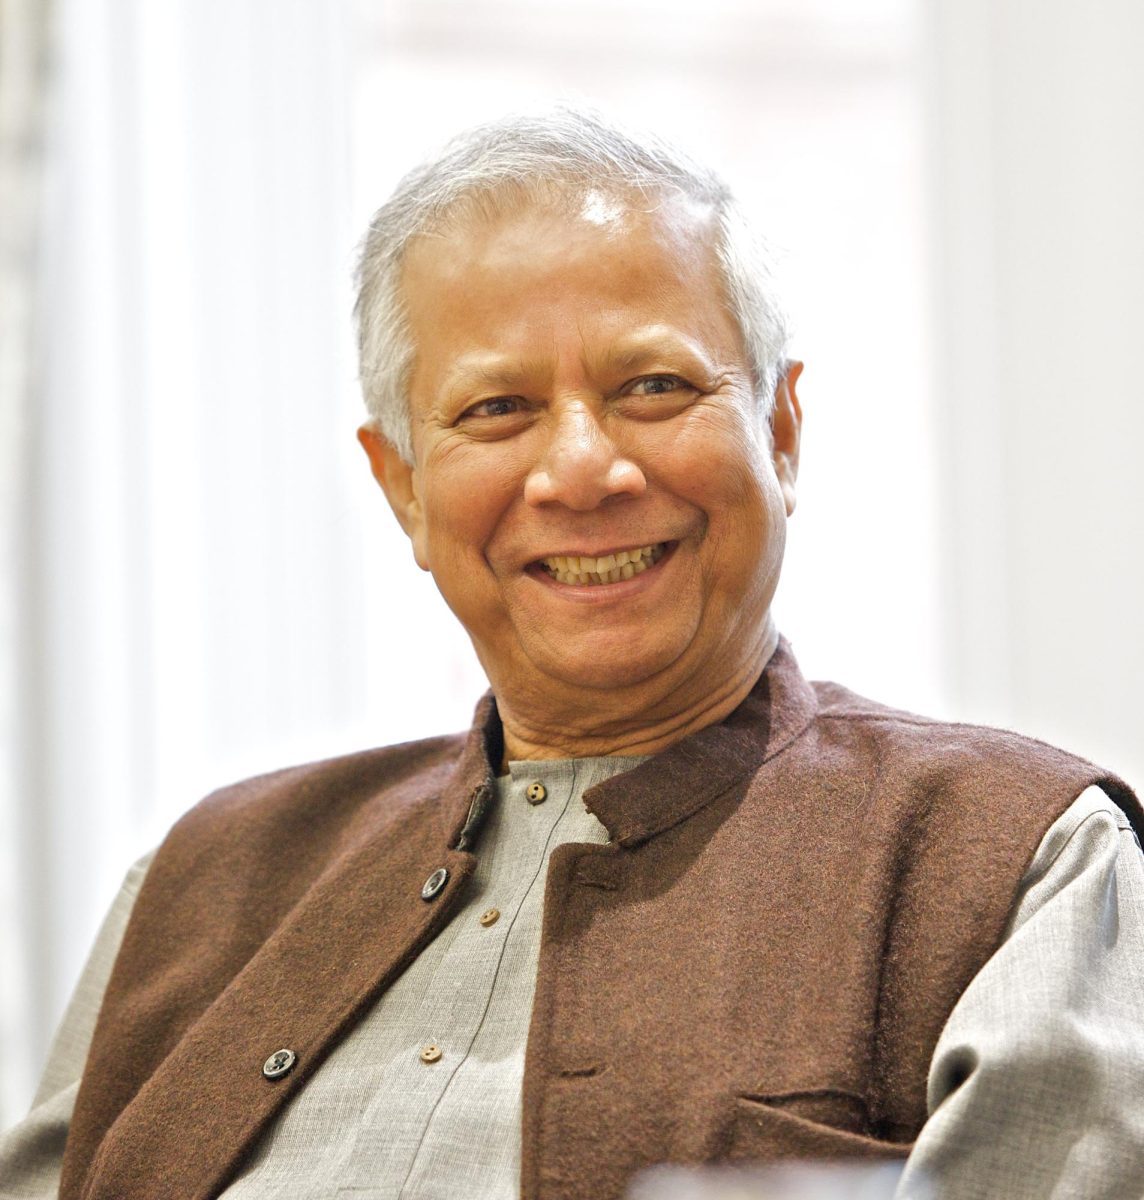 Description: Nobel Peace Prize winner Muhammad Yunus championed his concept of social business as a way to release deprived people from the ‘prison’ of welfare at a special summit hosted by the University of Salford on Saturday 18 May.
Date: 18 May 2013, 07:53
Source: Professor Muhammad Yunus: Building: Social Business Summit
Author: University of Salford Press 